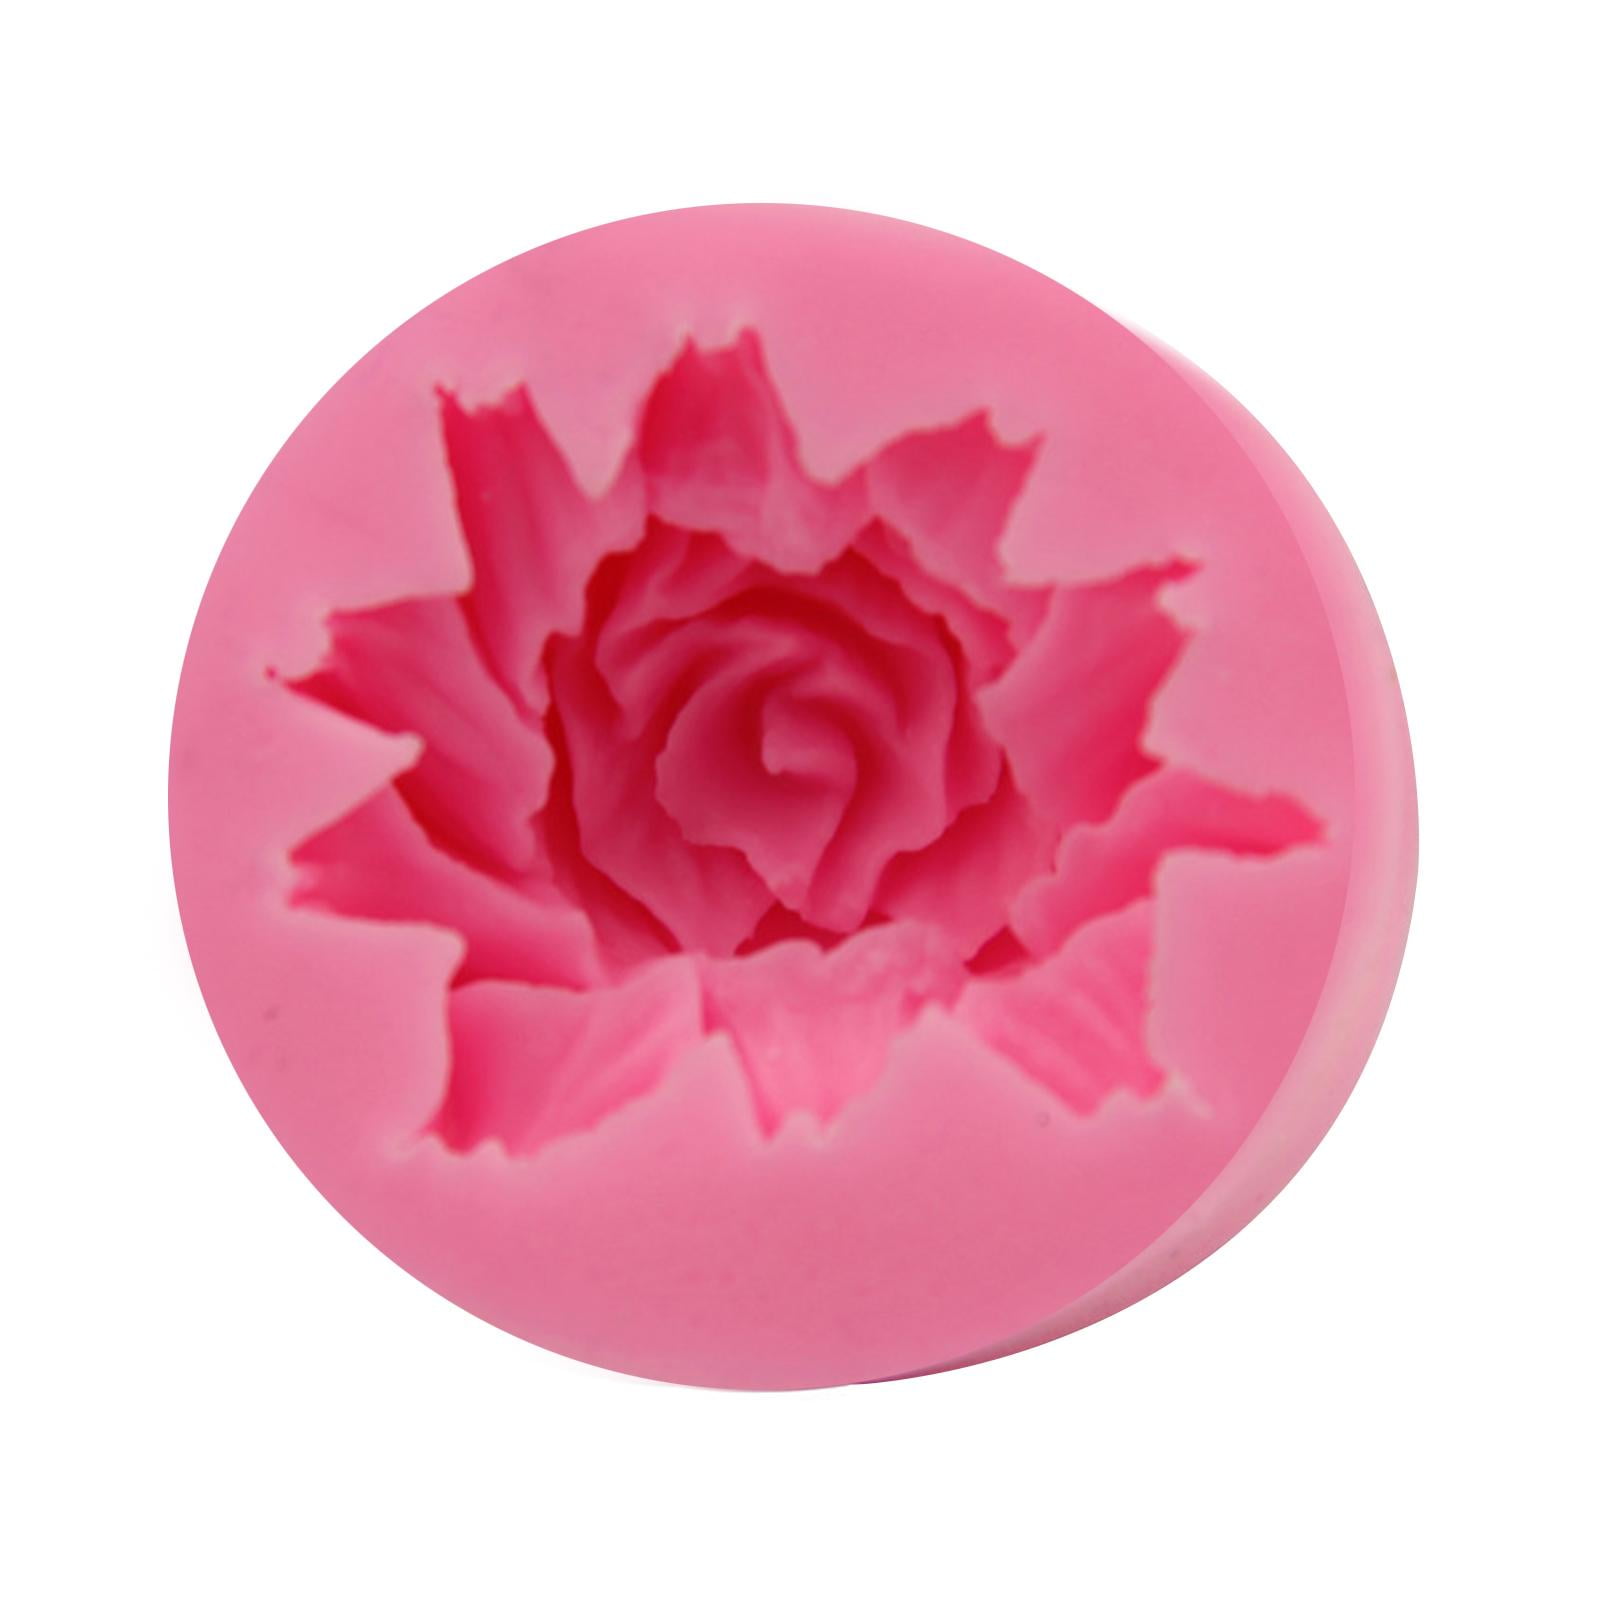 Flower Bloom Rose shape Silicone Fondant Soap 3D Cake Mold Cupcake Jelly  Candy Chocolate Decoration Baking Tool Moulds